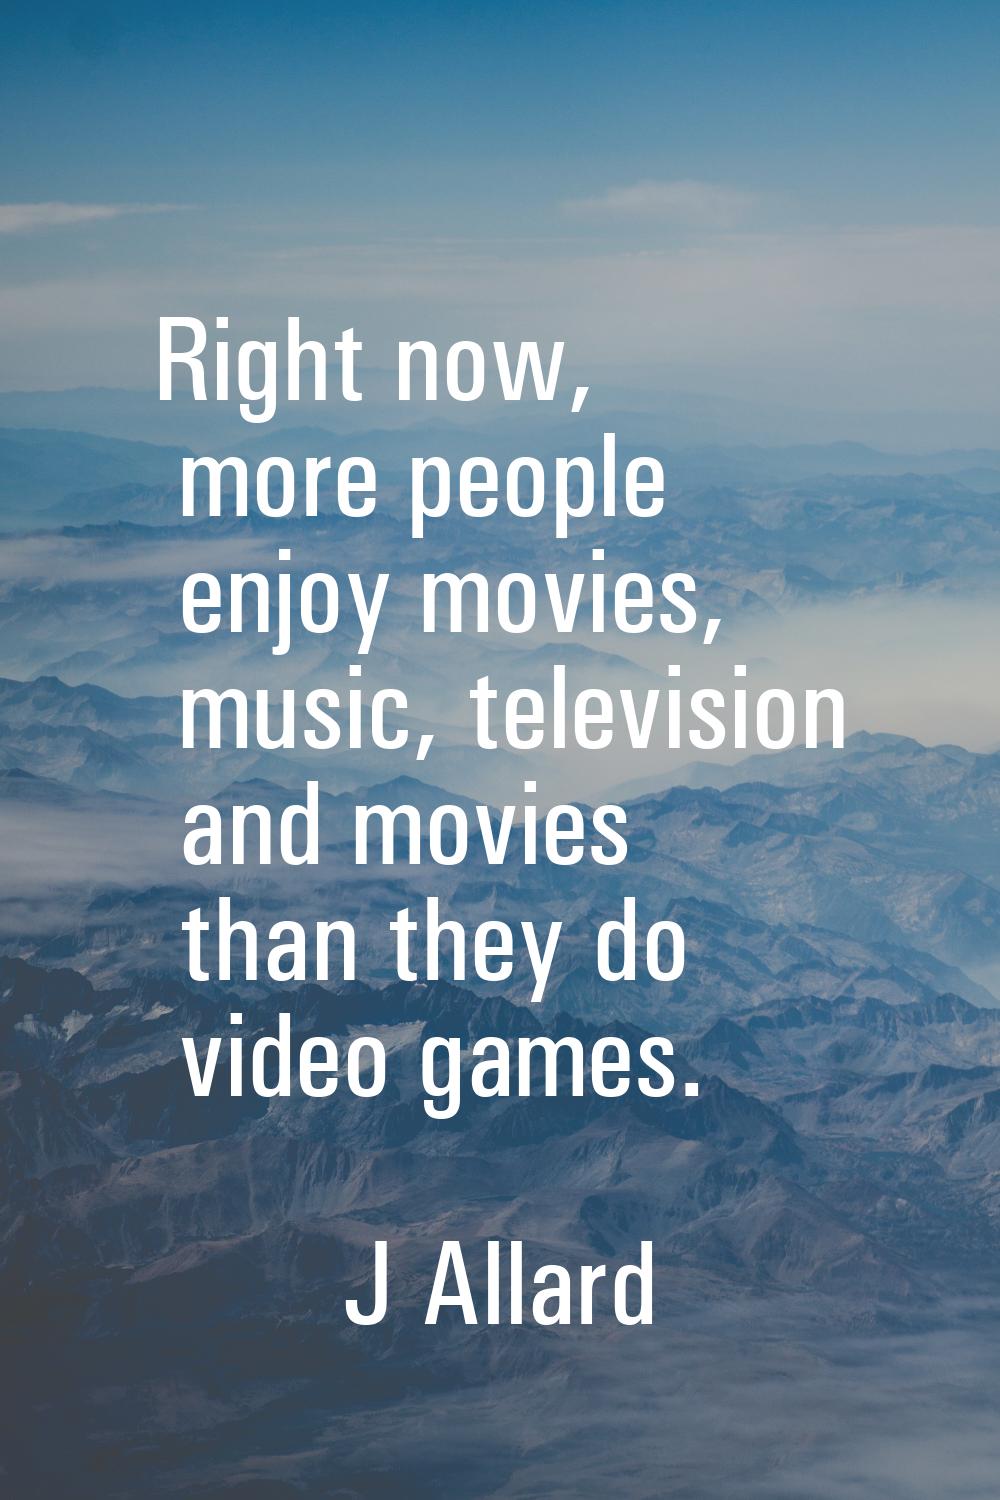 Right now, more people enjoy movies, music, television and movies than they do video games.